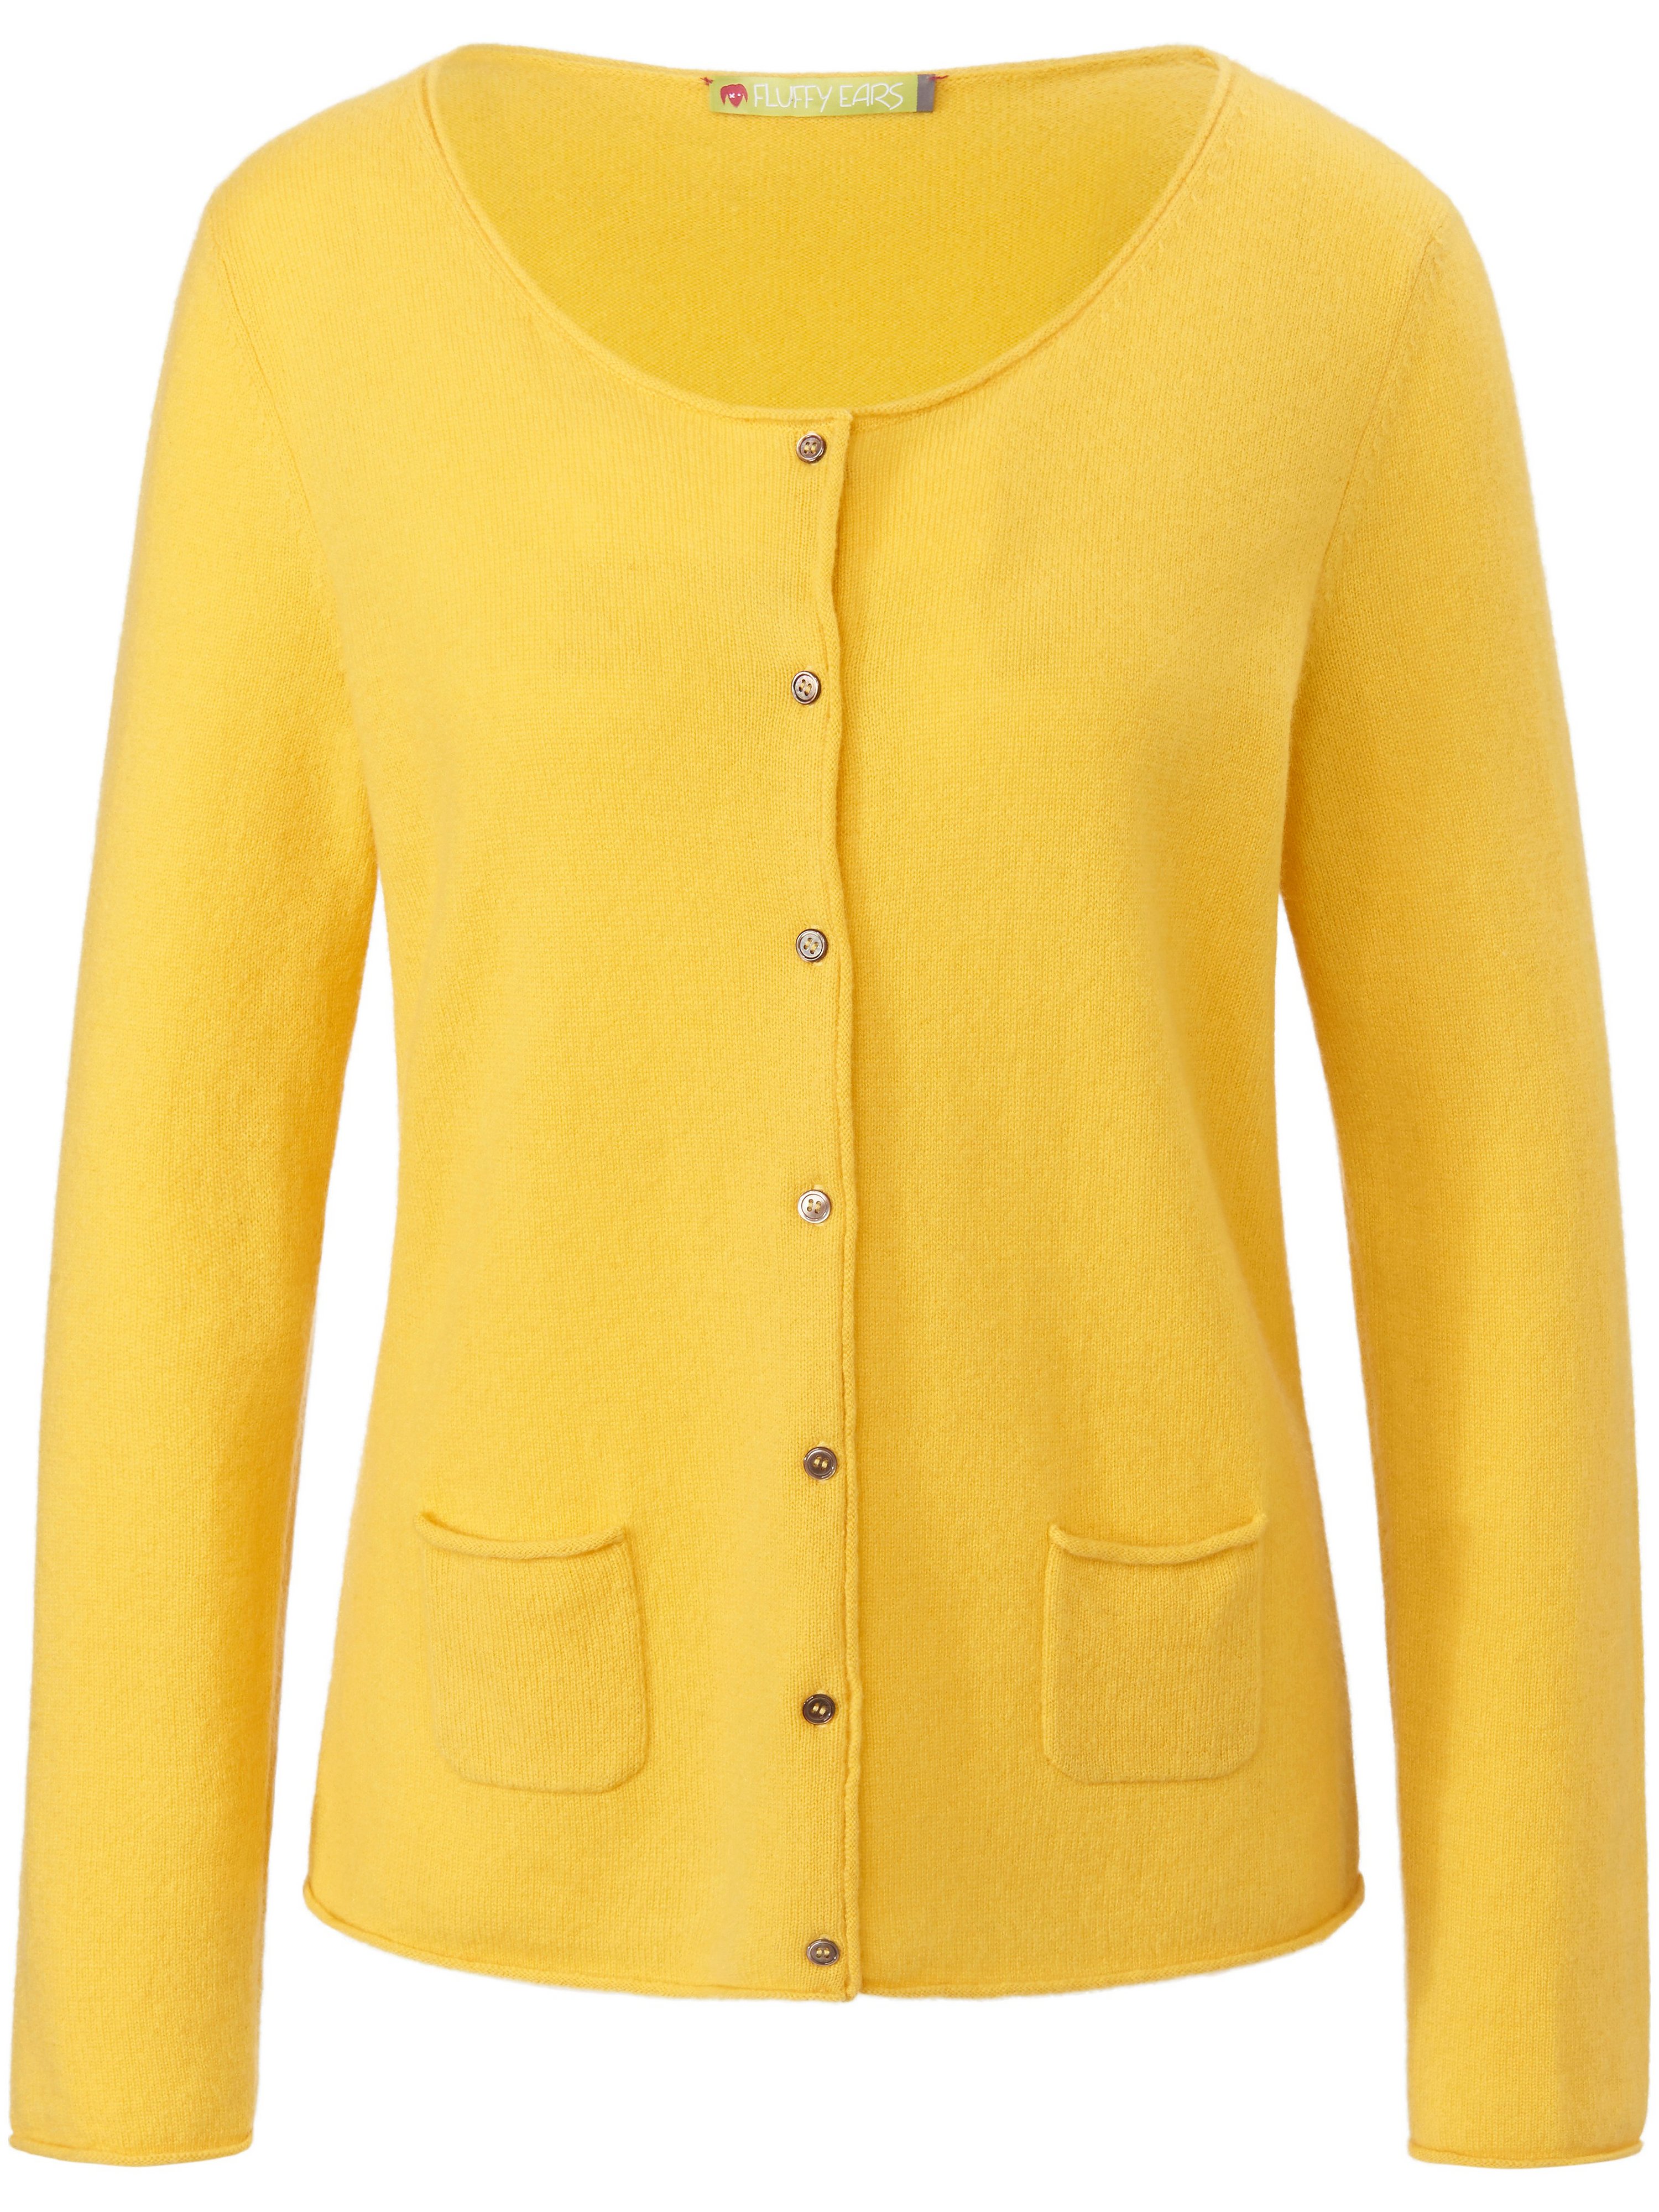 Le cardigan pur cachemire  FLUFFY EARS jaune taille 48